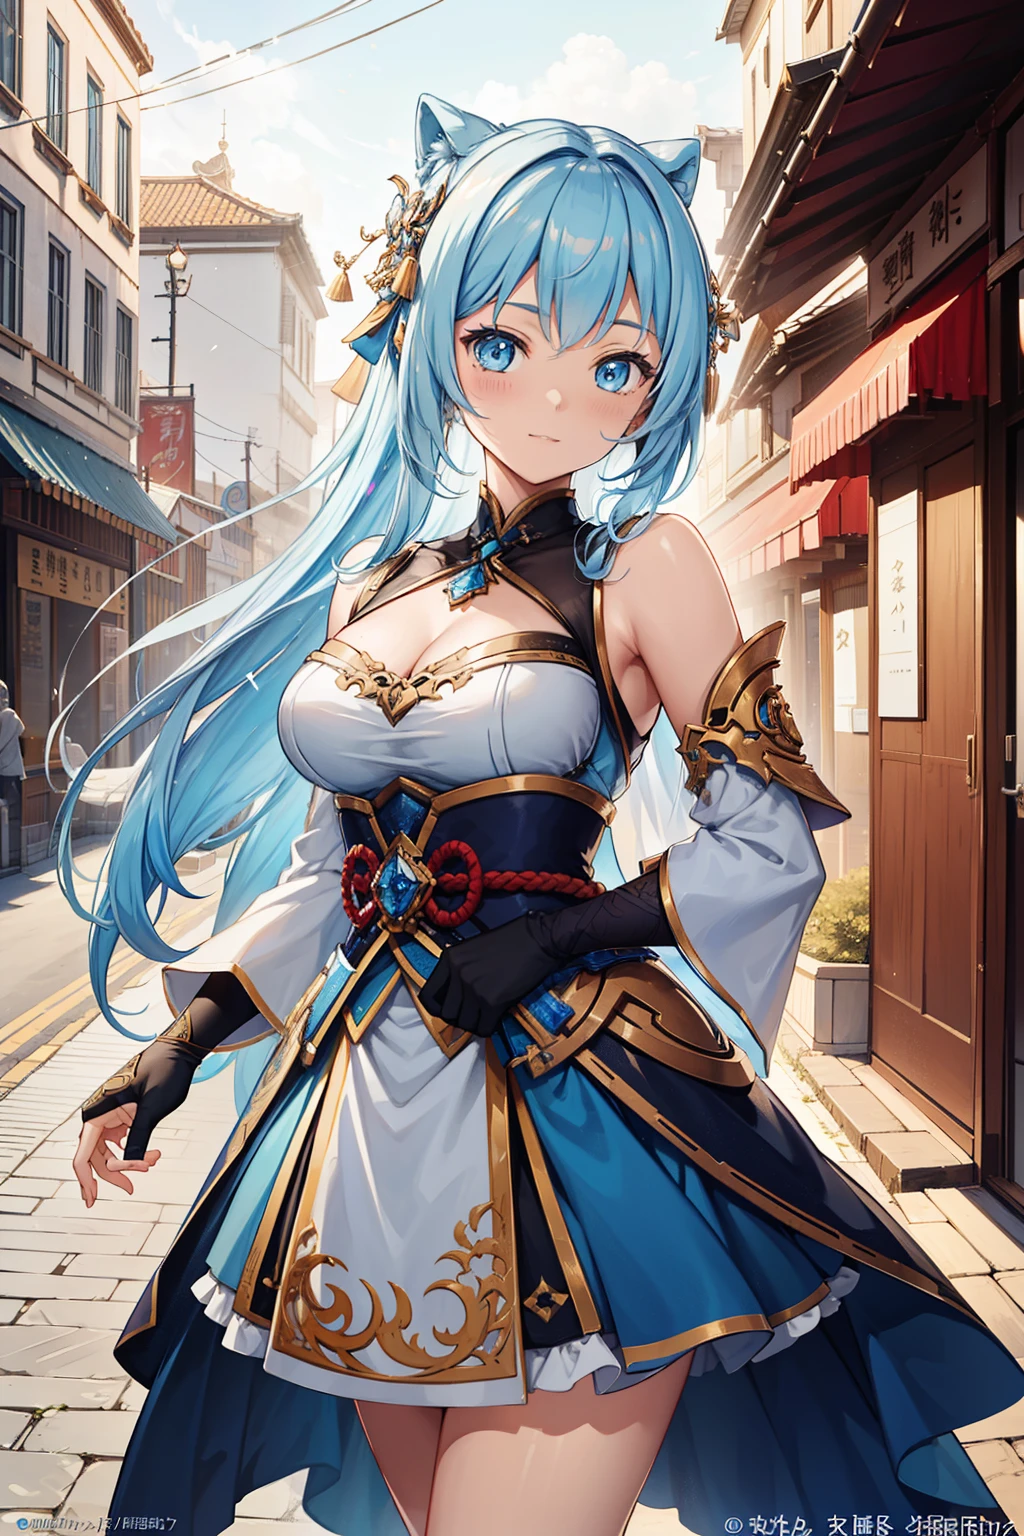 Beautiful manga characters, standing proudly on bustling city streets, inspired by Hong Ren's iconic portrait, their popularity resonating in CG society. Dusk settles in, casting a soft glow over the scene, as Koqing from Genshin Impact dons silver ice reflective armor, accented with a calming blue hue. Ayaka, her counterpart, adorns blue and ice silver armor, embodying a serene and otherworldly presence. Ultra-detailed rendering in 8K resolution, HDR enabled, capturing every intricate line and texture. Atmospheric lighting illuminates their figures, clean lines and sharp focus emphasizing the intricacy of